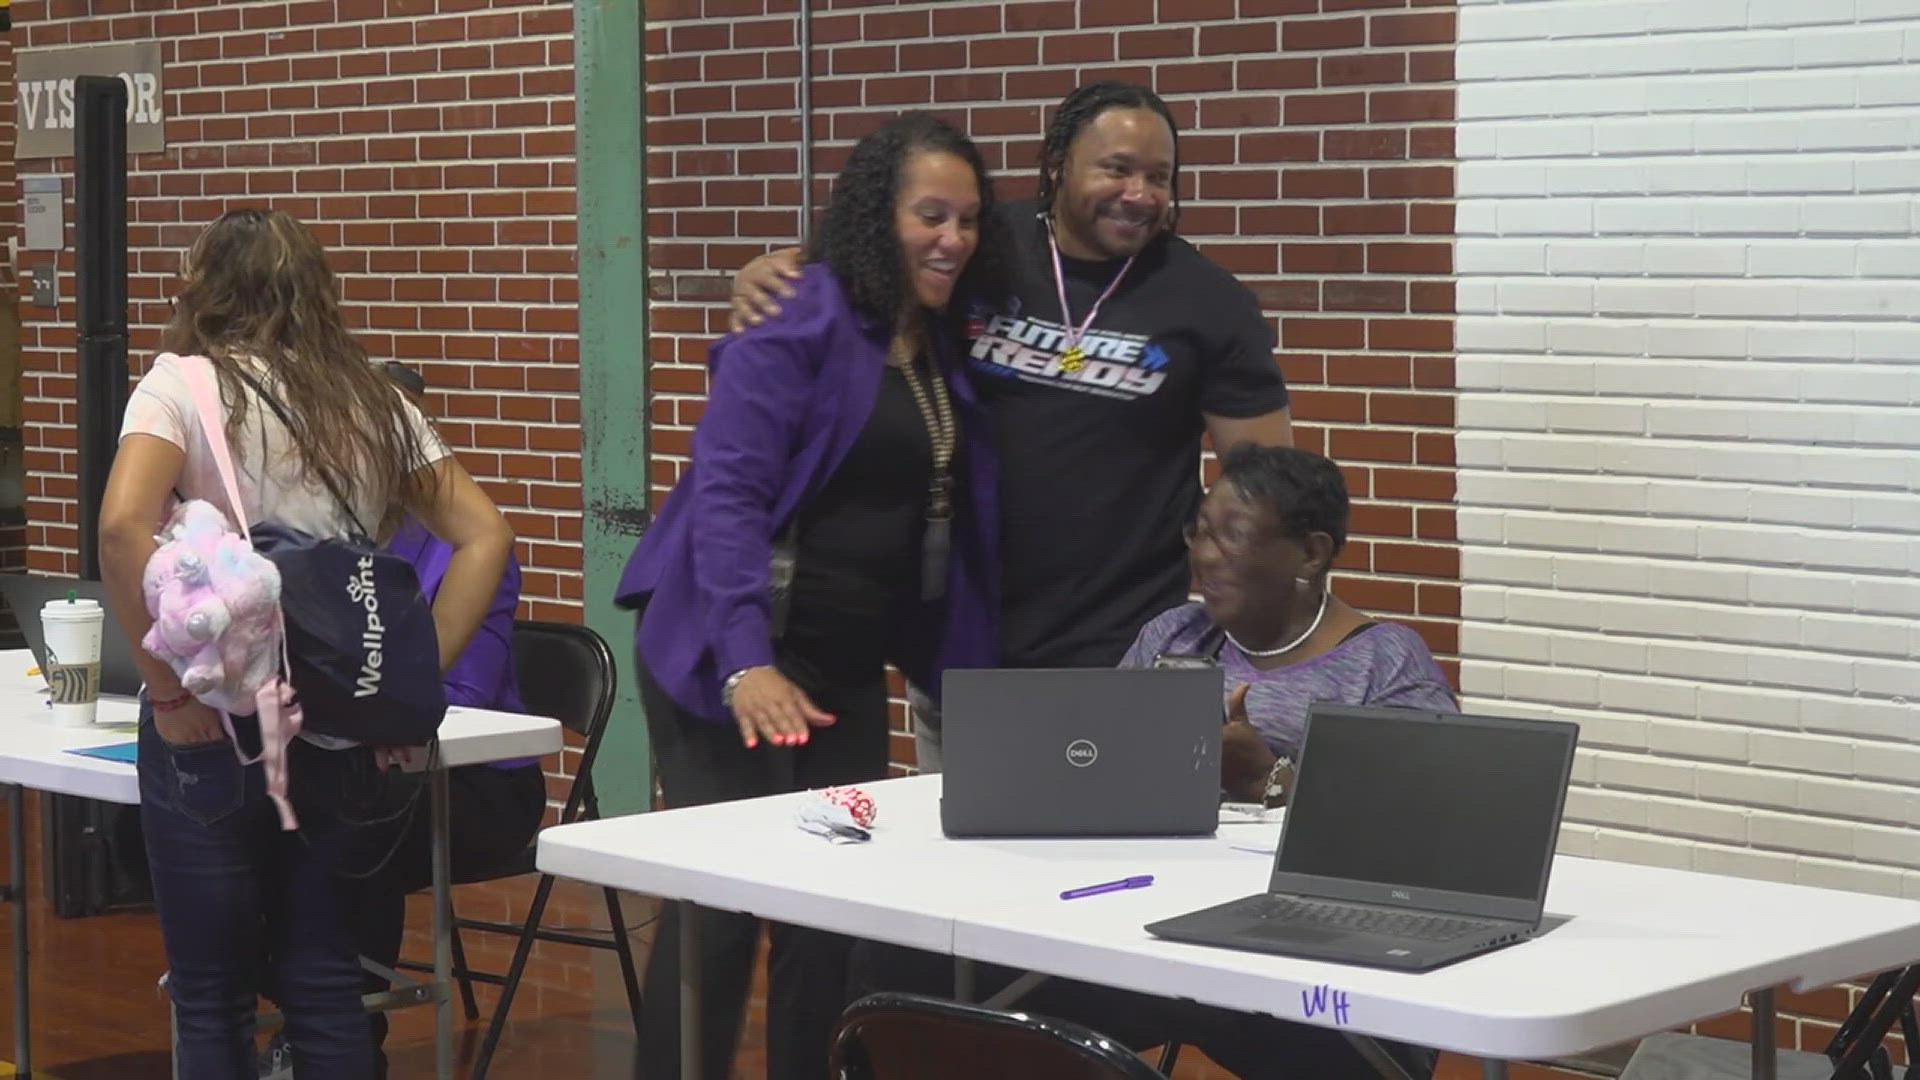 The event was held at the Beaumont Early College High School, and gave parents a chance to get their kids registered early for next school year.